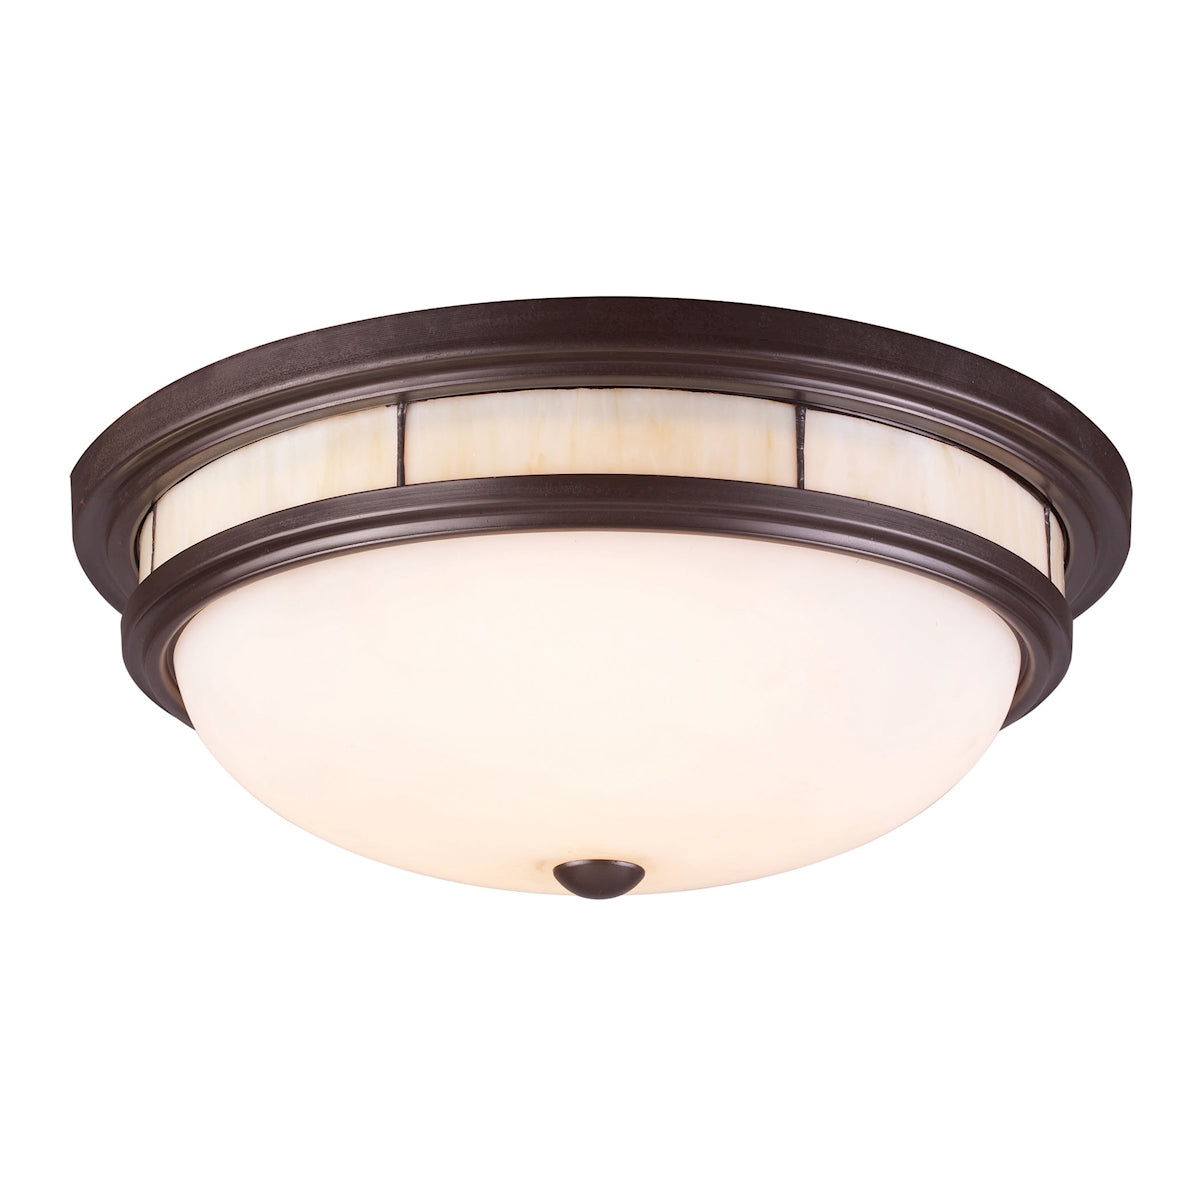 ELK Lighting 70014-3 Tiffany 3-Light Flush Mount in Oiled Bronze with Glass Shade and Panels